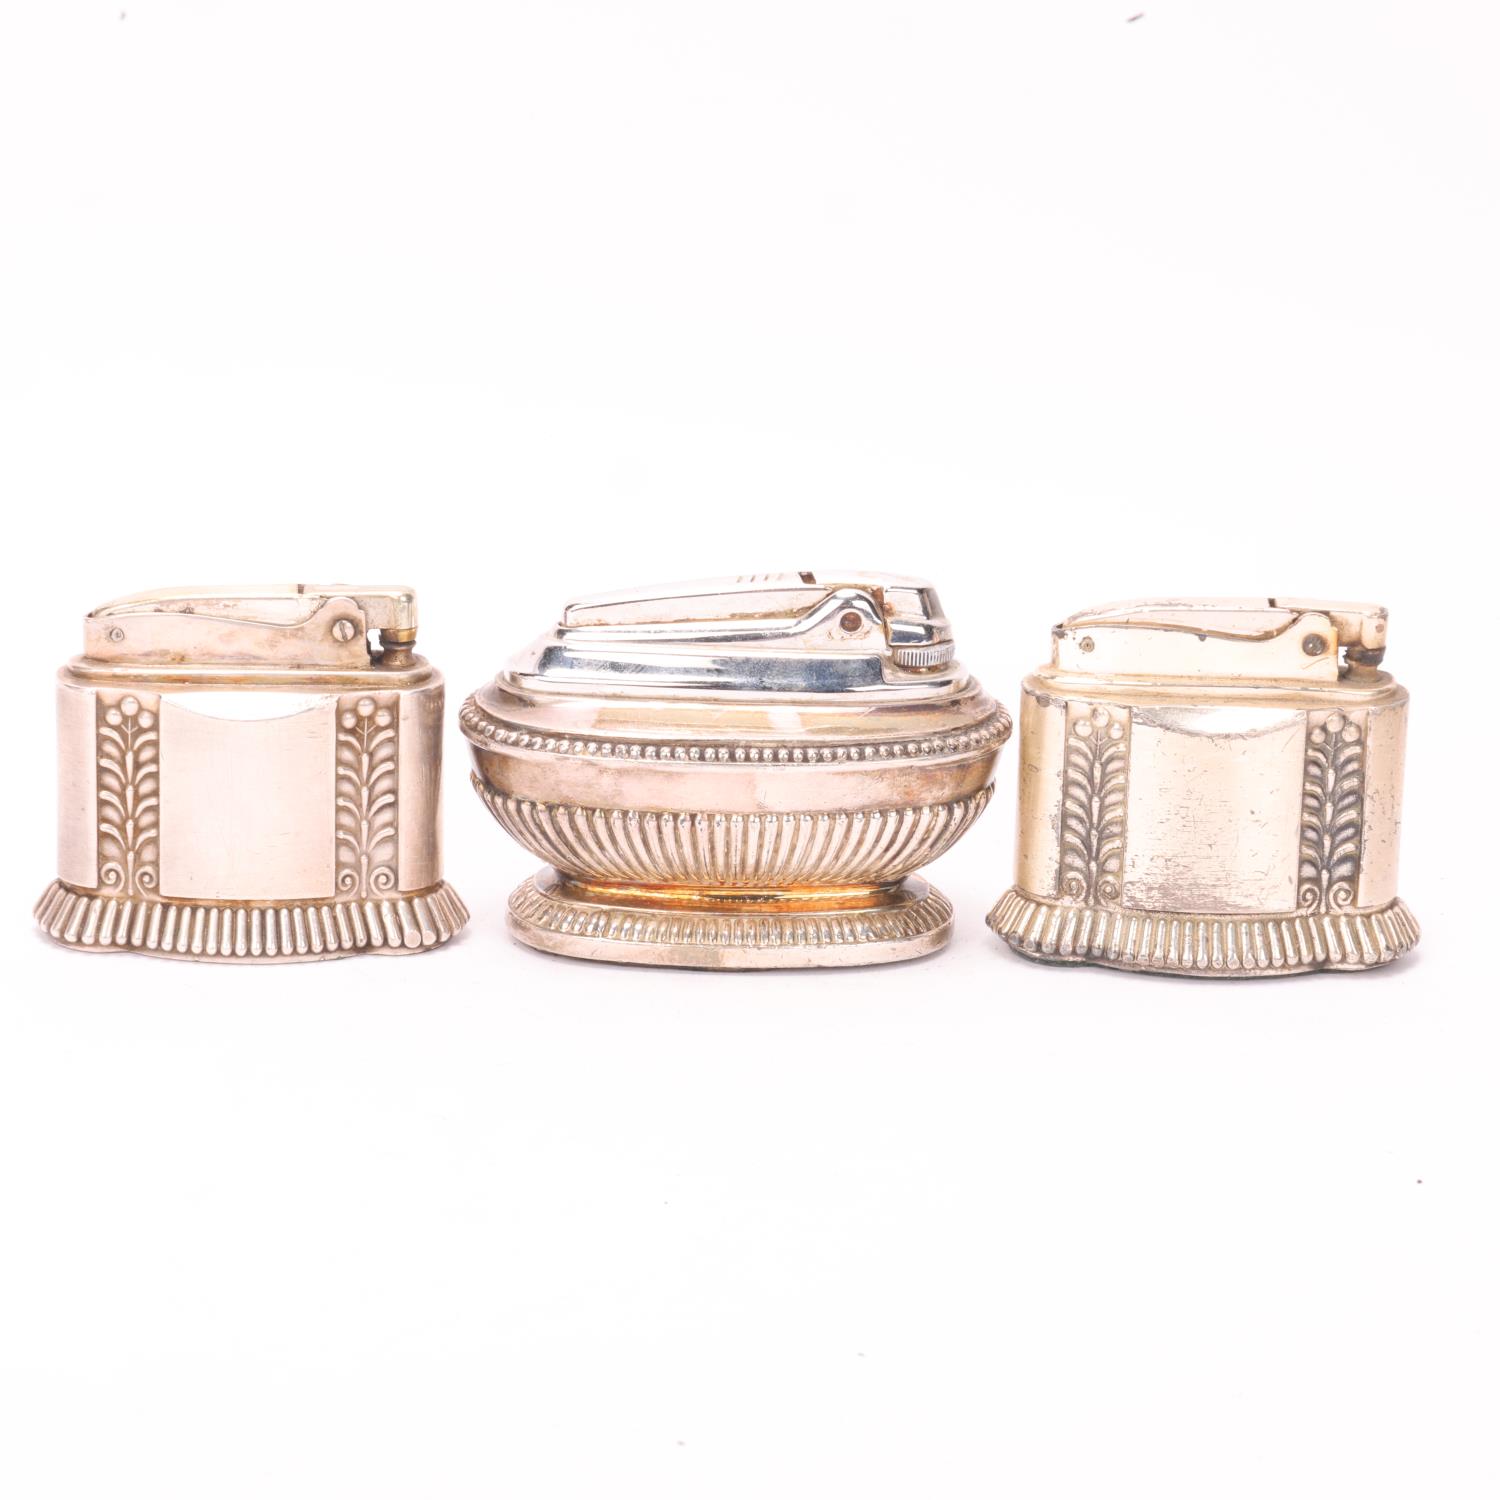 3 vintage Ronson silver plated table lighters, 2 "Diana" models and 1 other Both Diana models appear - Image 2 of 4